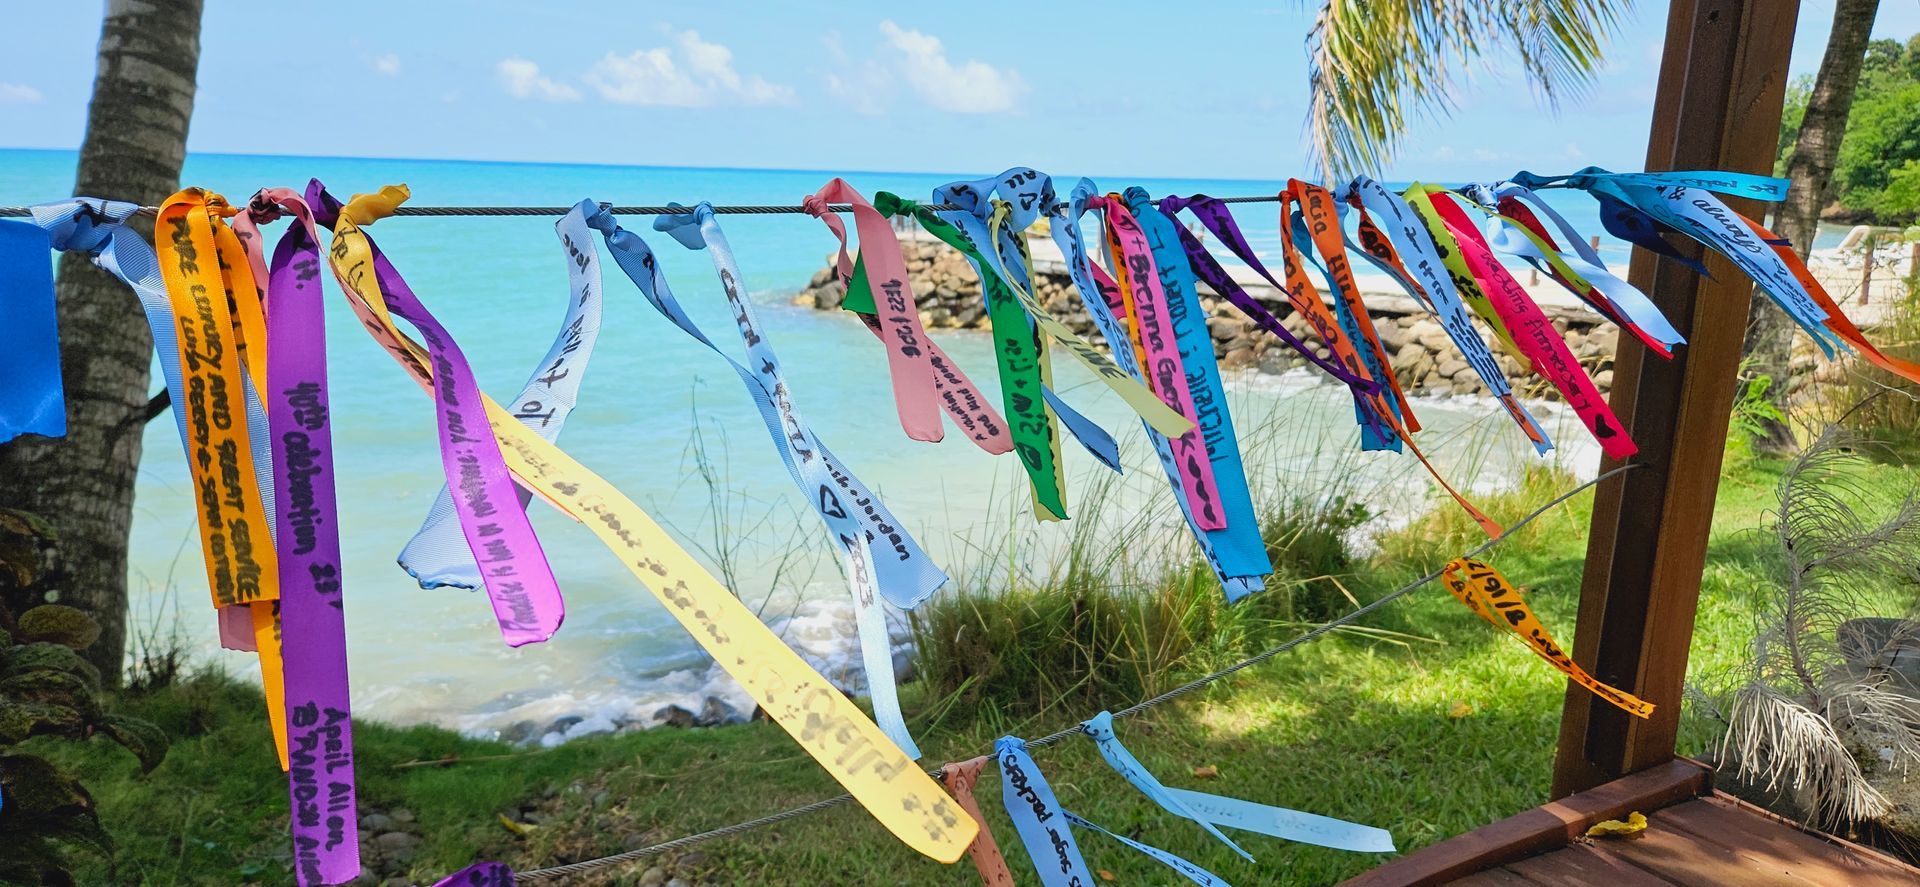 a bunch of colorful ribbons are hanging on a clothes line near the ocean .